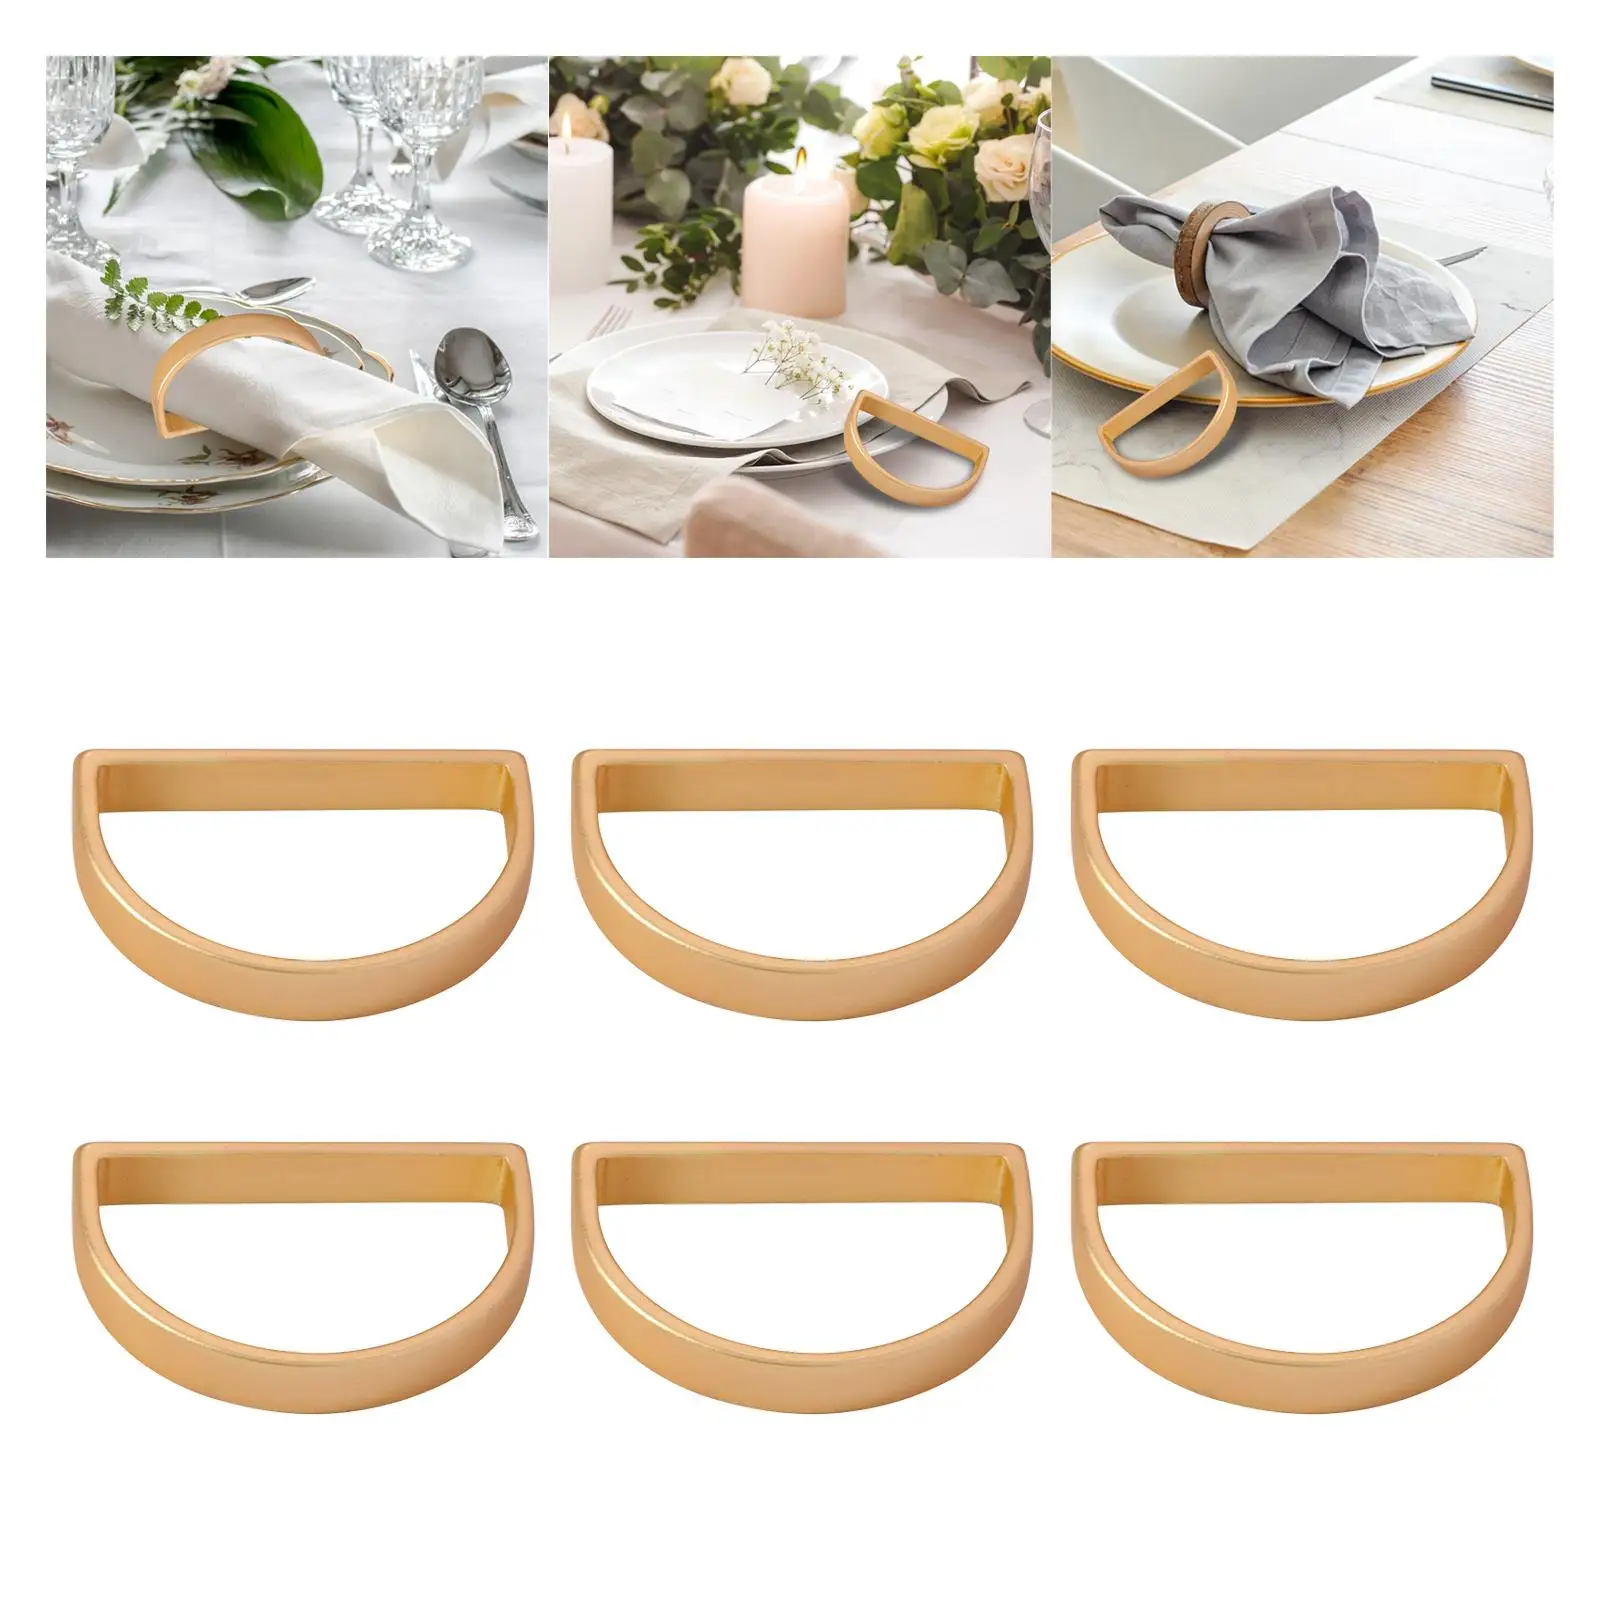 6Pcs Napkin Holder Rings Adornment Serviette Buckles for Party Wedding Table